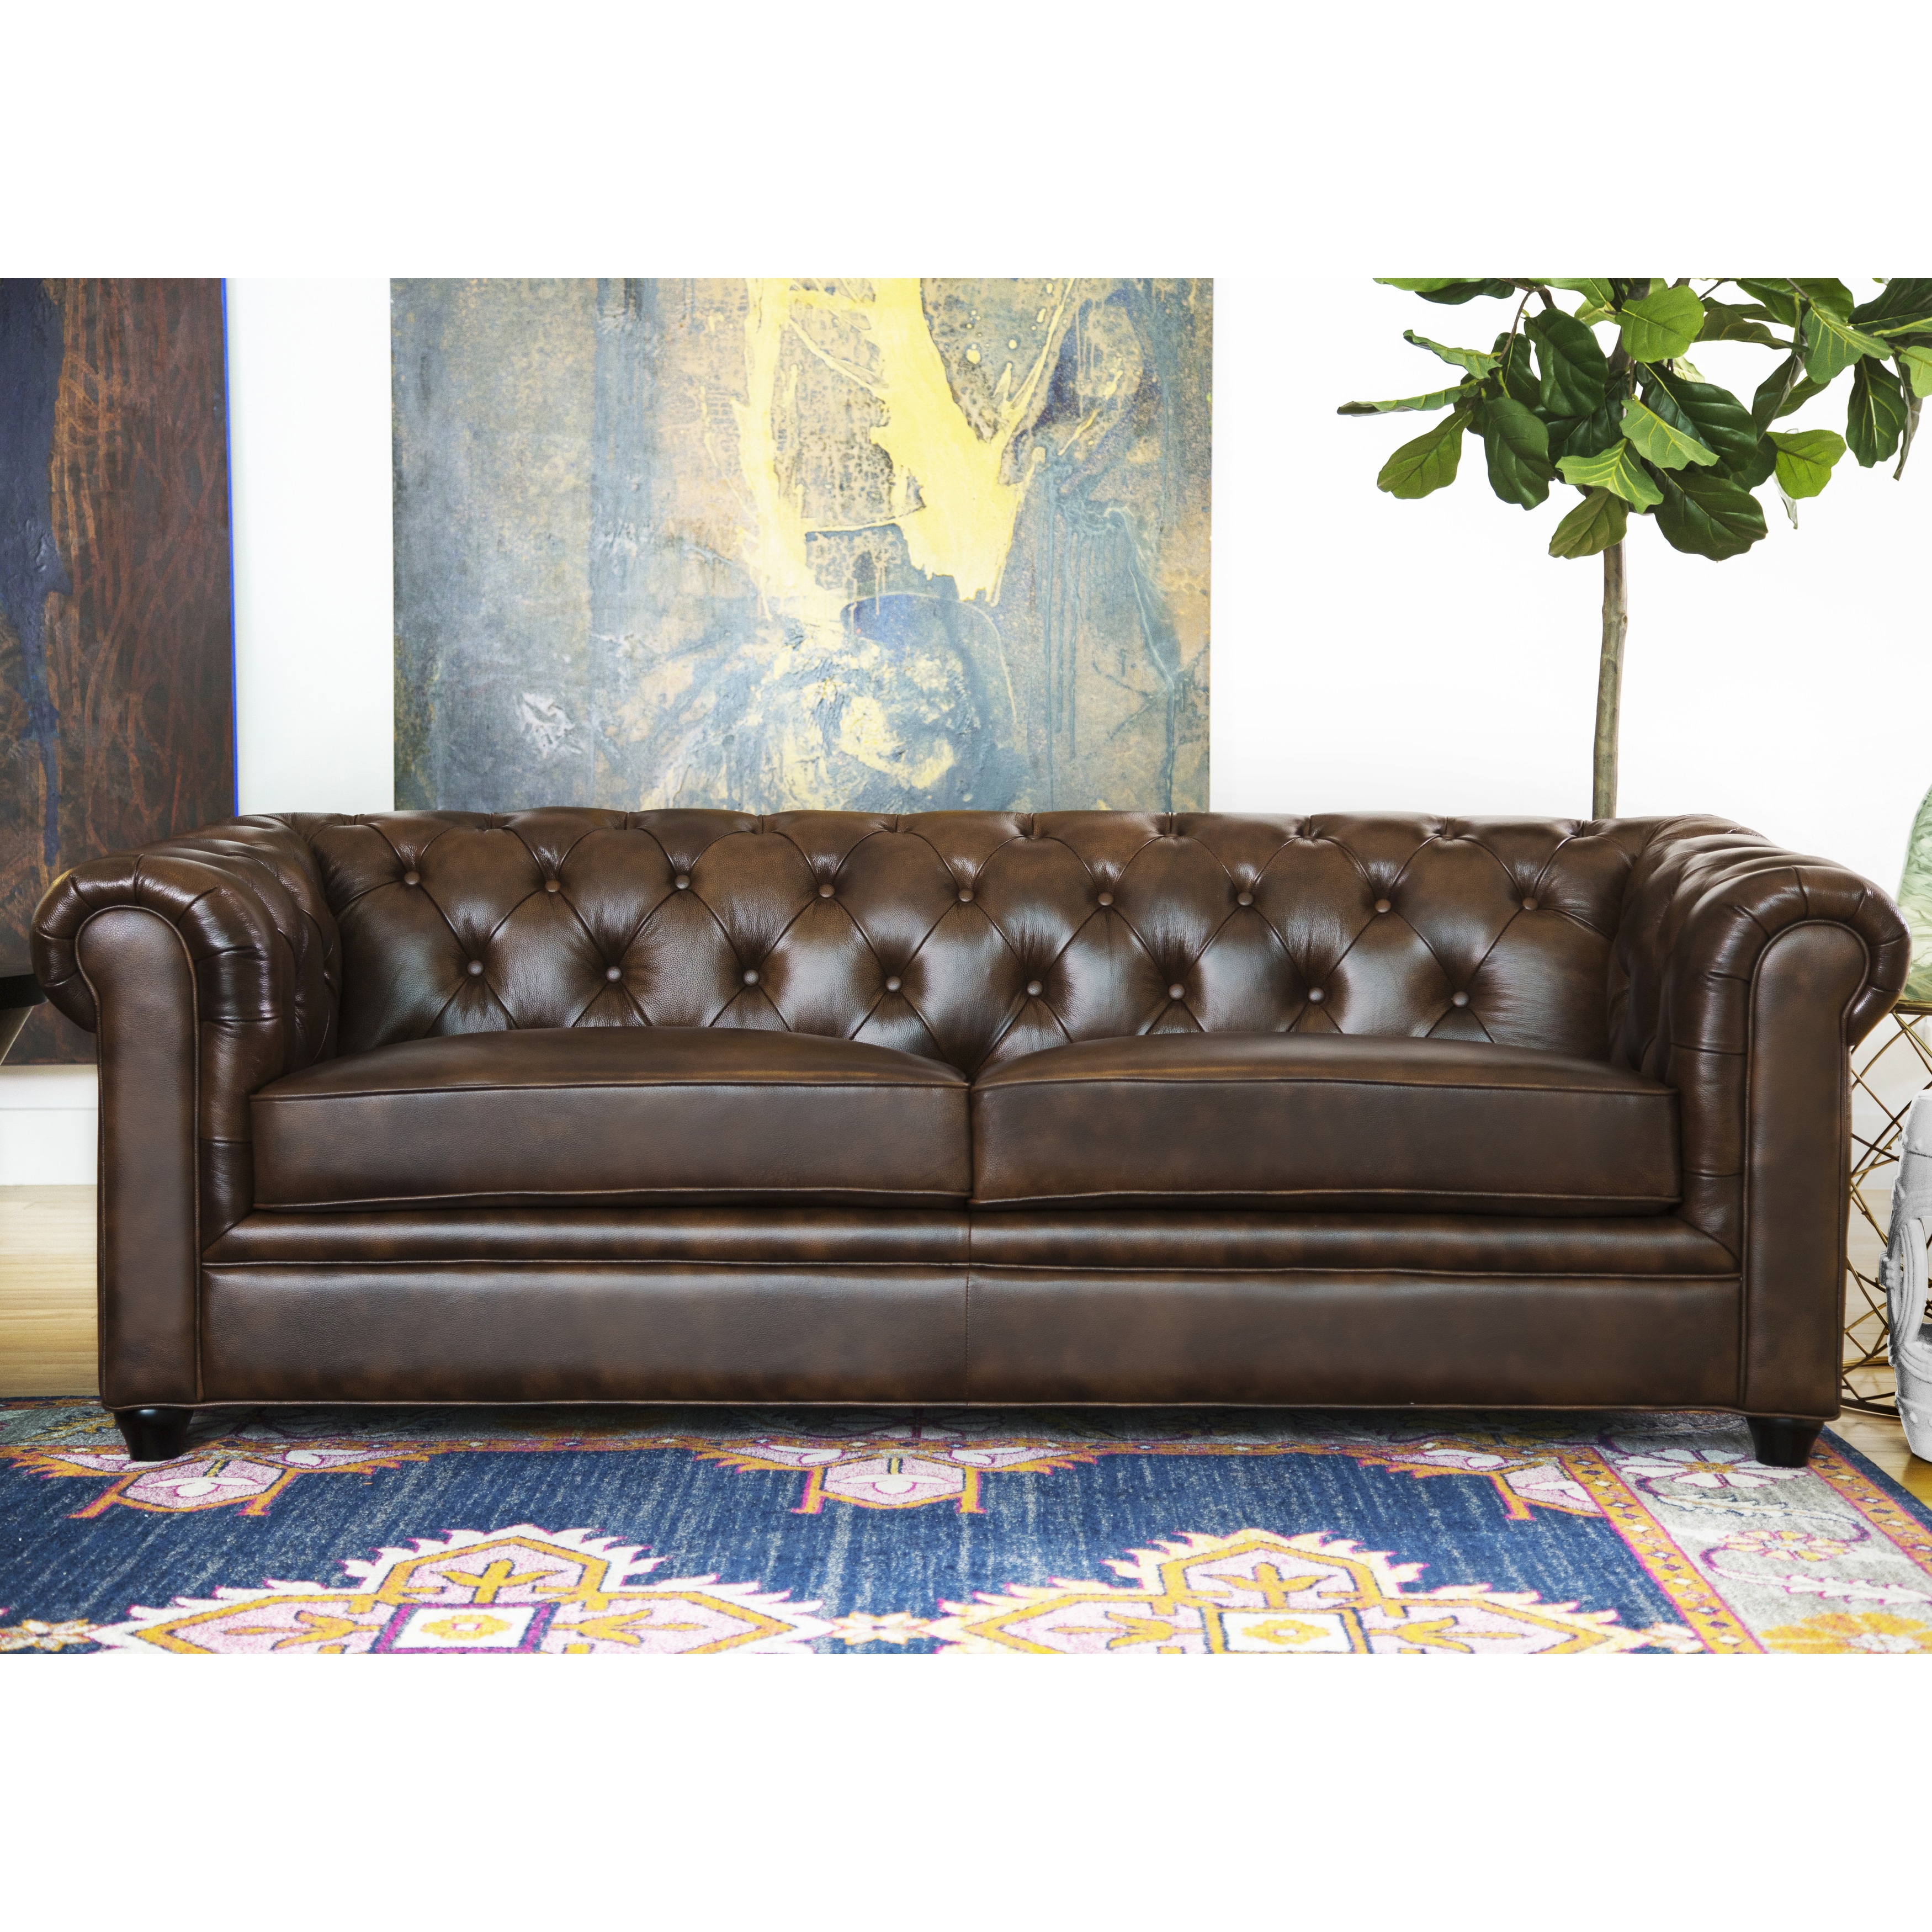 Abbyson Tuscan Top Grain Leather Chesterfield Sofa - Free Shipping ...